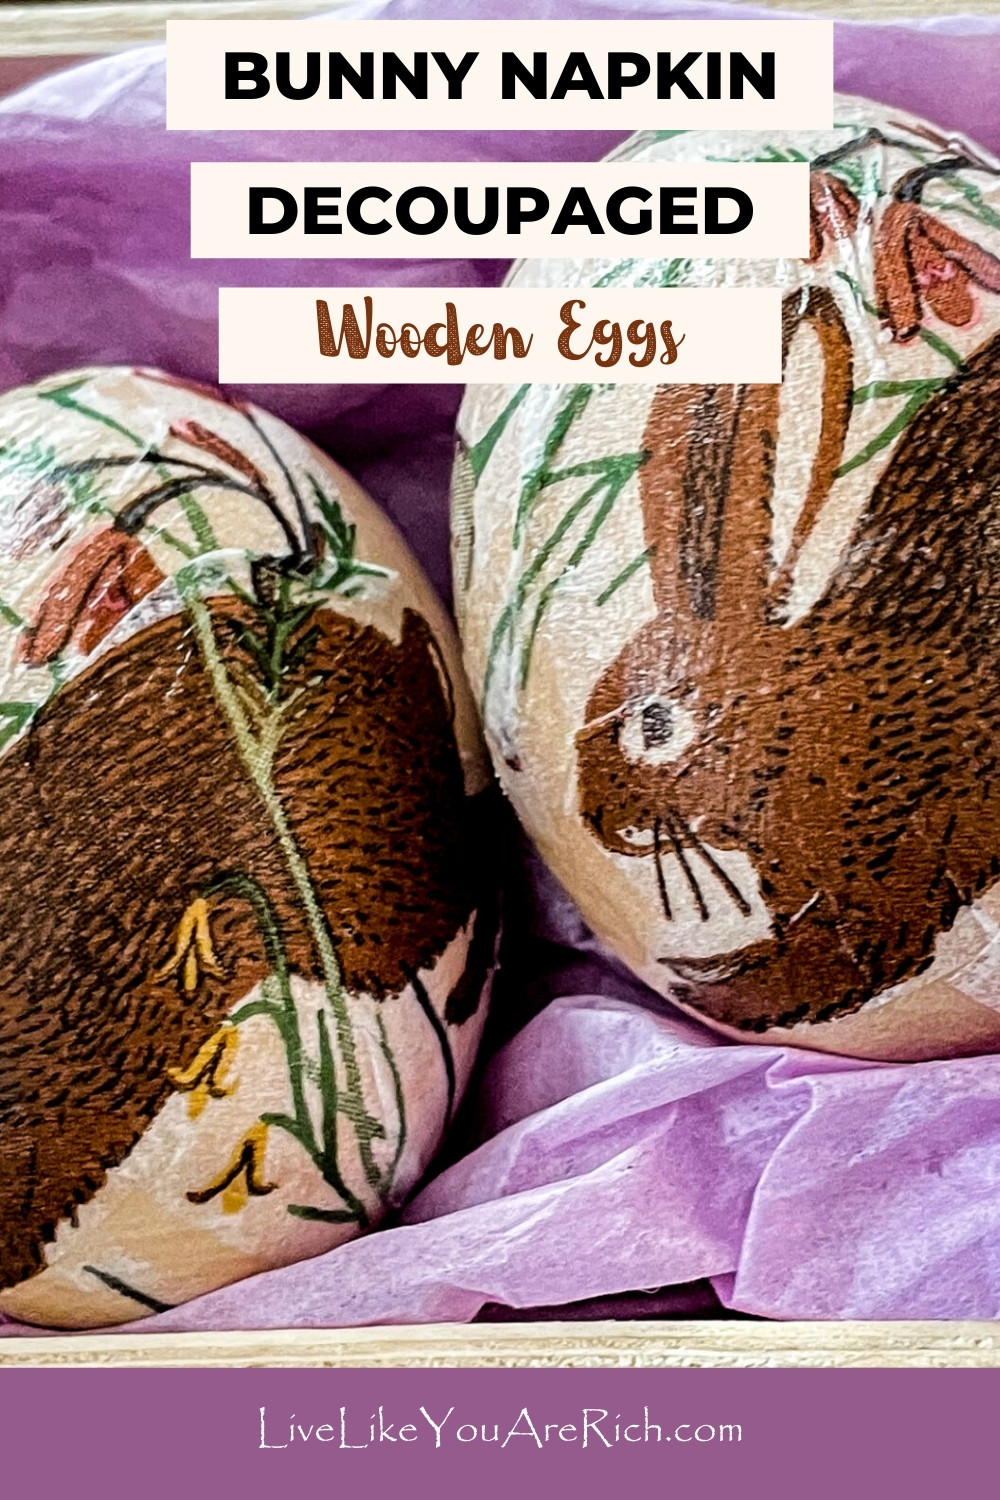 Bunny Napkin Decoupaged Wooden Eggs. These decoupaged eggs make a fun Easter decor item that can be used for a variety of things.  You could use them to decorate a mantel, an Easter tablescape, a side table, or many other areas in the home. They are very simple/easy to make, quick to put together and inexpensive—my golden standard for crafting.